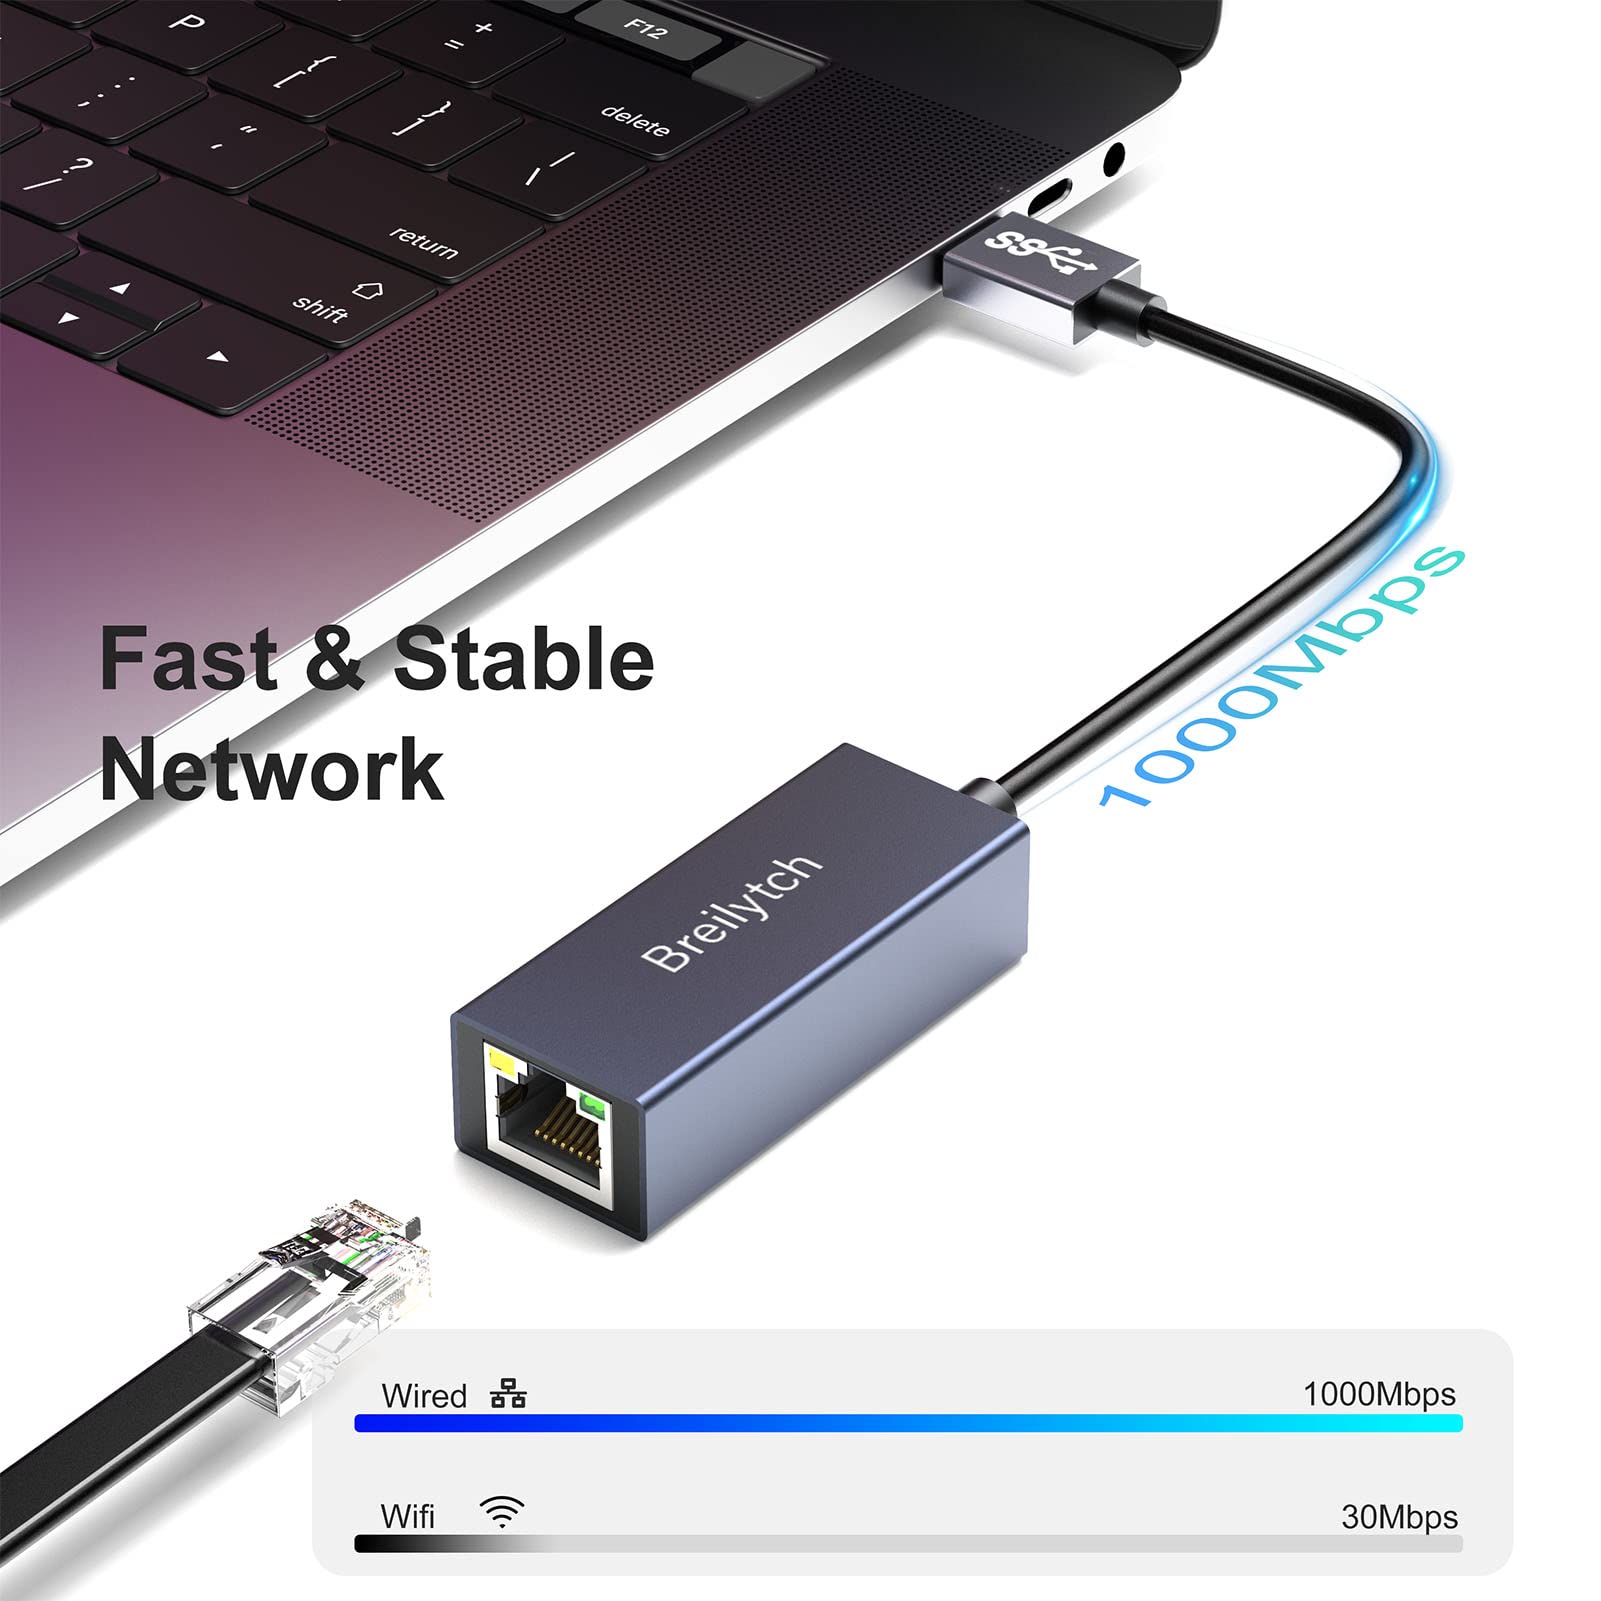 USB to Ethernet Adapter,Breilytch USB 3.0 to 10/100/1000 Gigabit Ethernet LAN Network Adapter Driver Free Compatible for MacBook, Surface Pro, Notebook PC with Windows7/8/10, XP, Mac/Linux,Vista